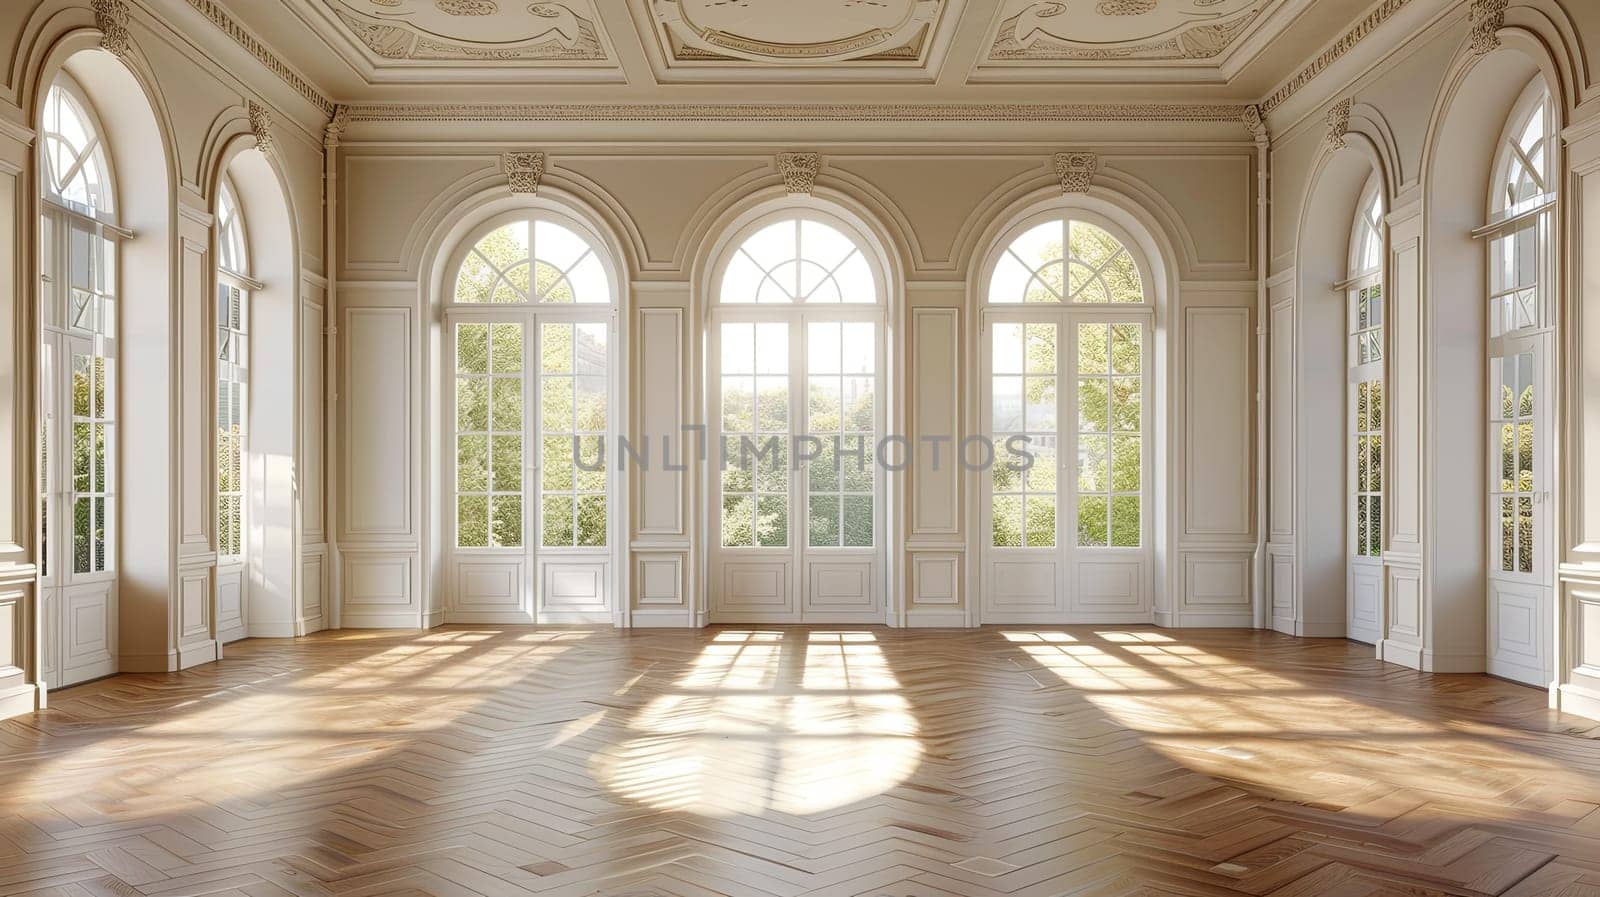 An empty banquet hall with vintage parquet floors and expansive windows, creating a bright and airy space.